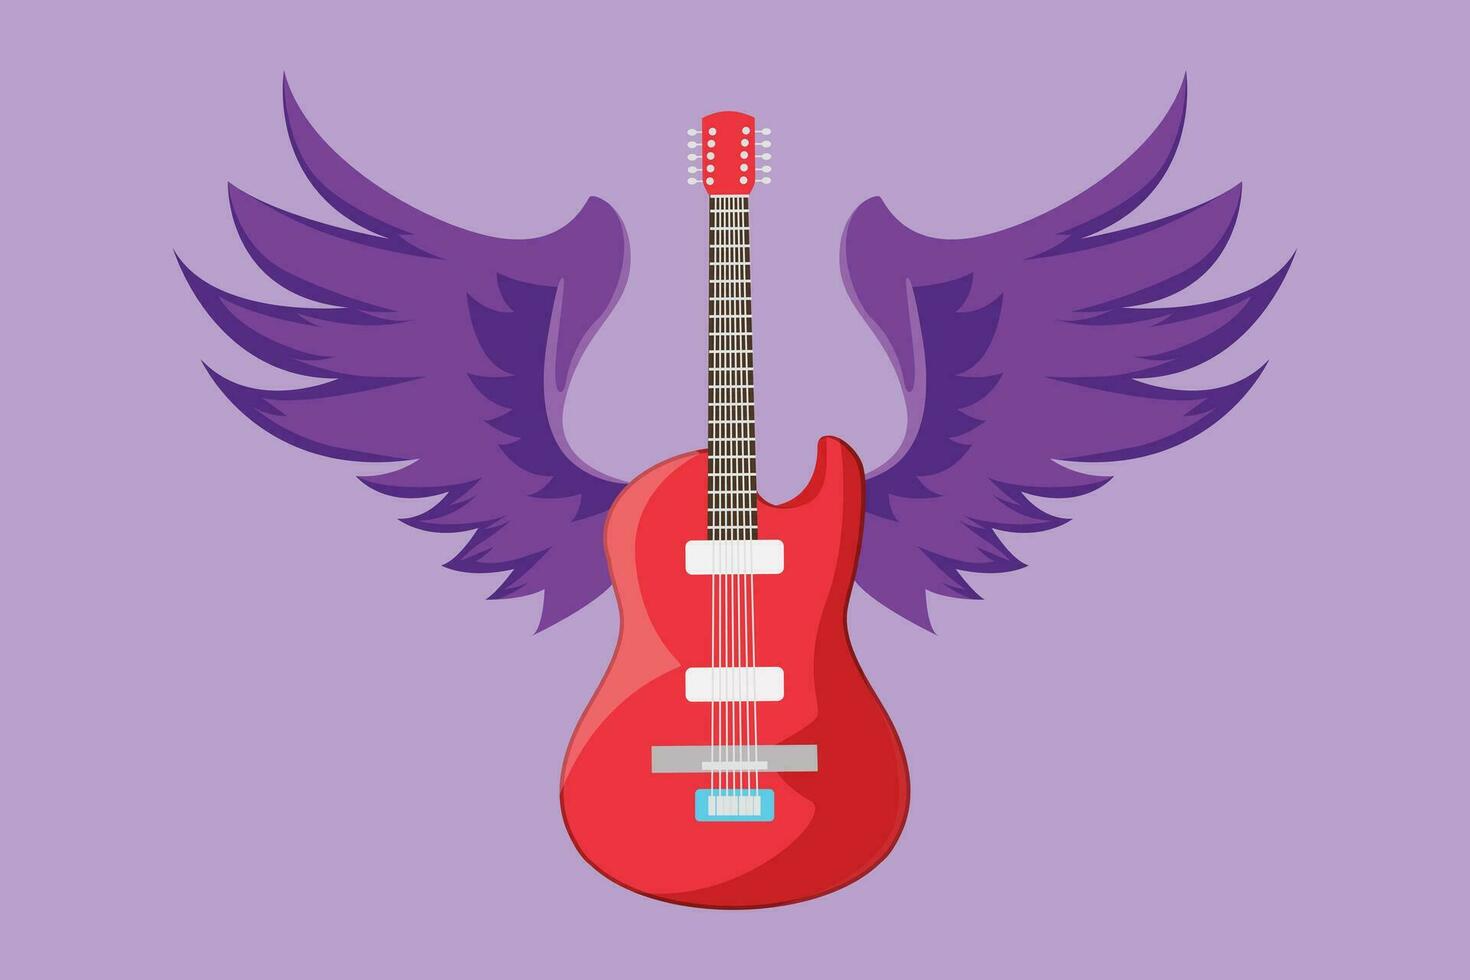 Cartoon flat style drawing rock and roll electric guitar with wings. Vintage label, icon, logotype guitar for musical performance. Rock sign for music festival logo. Graphic design vector illustration